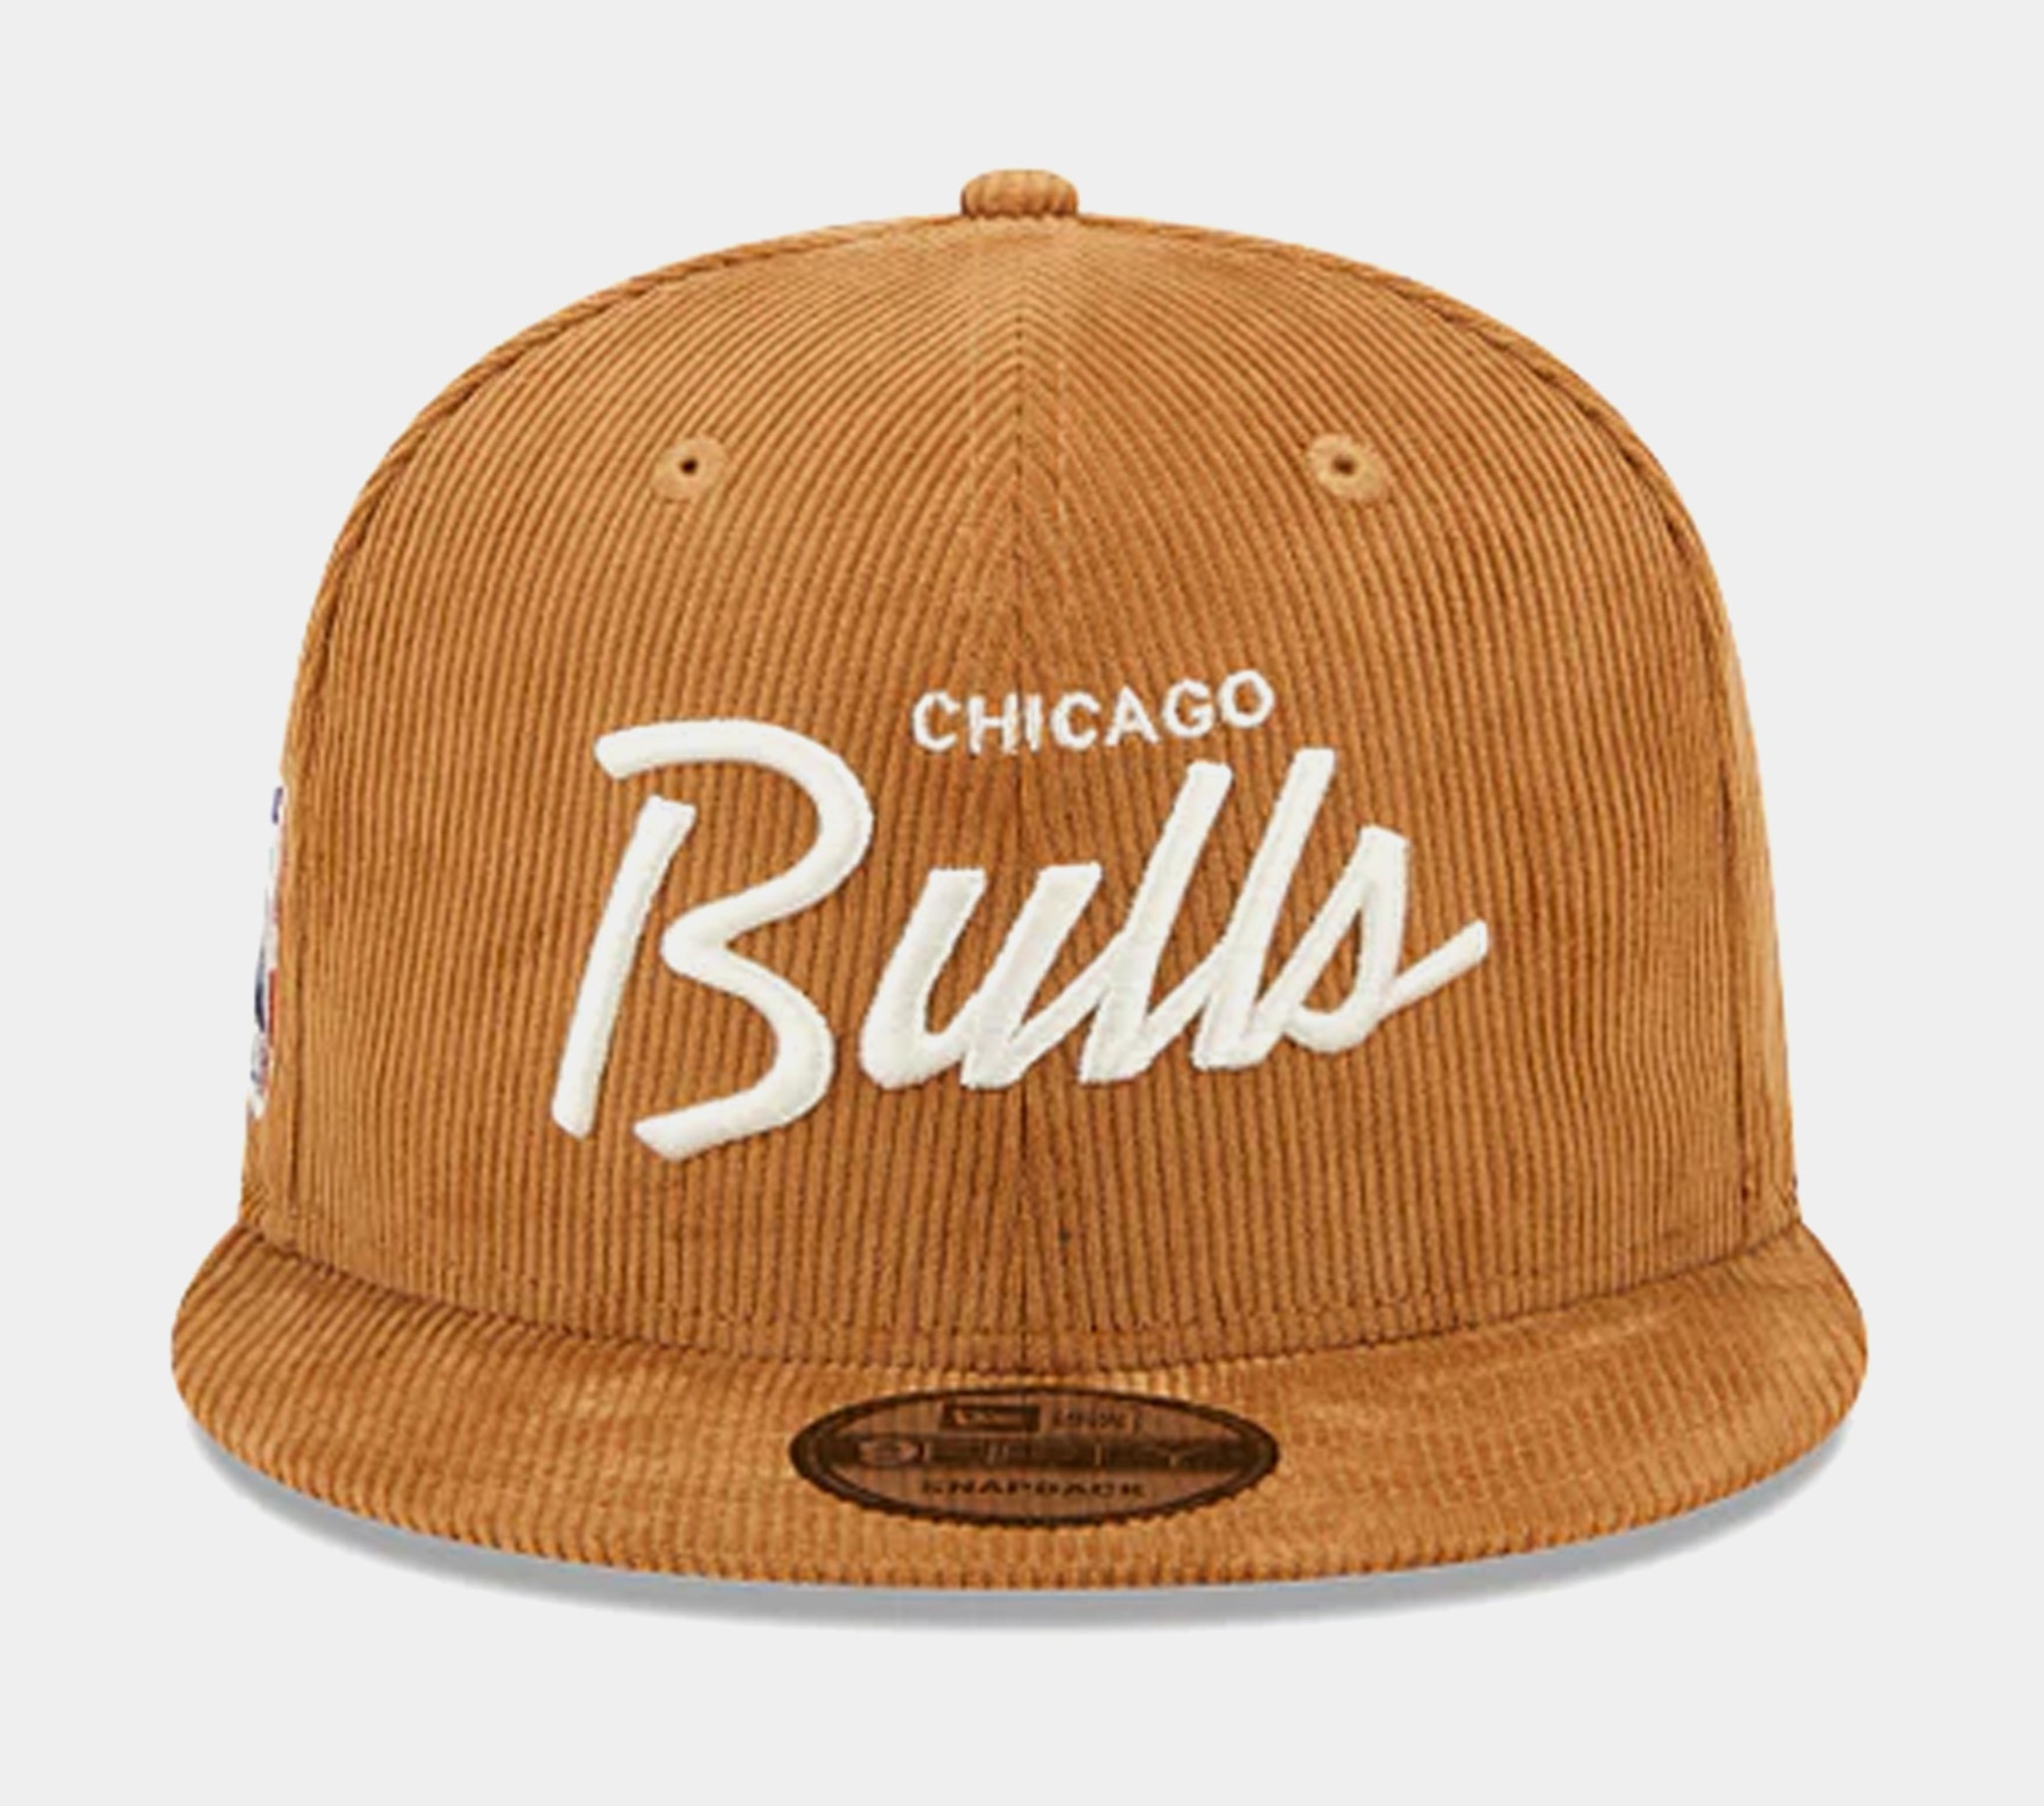 Chicago Bulls PIN-SCRIPT Black-Red Fitted Hat by New Era